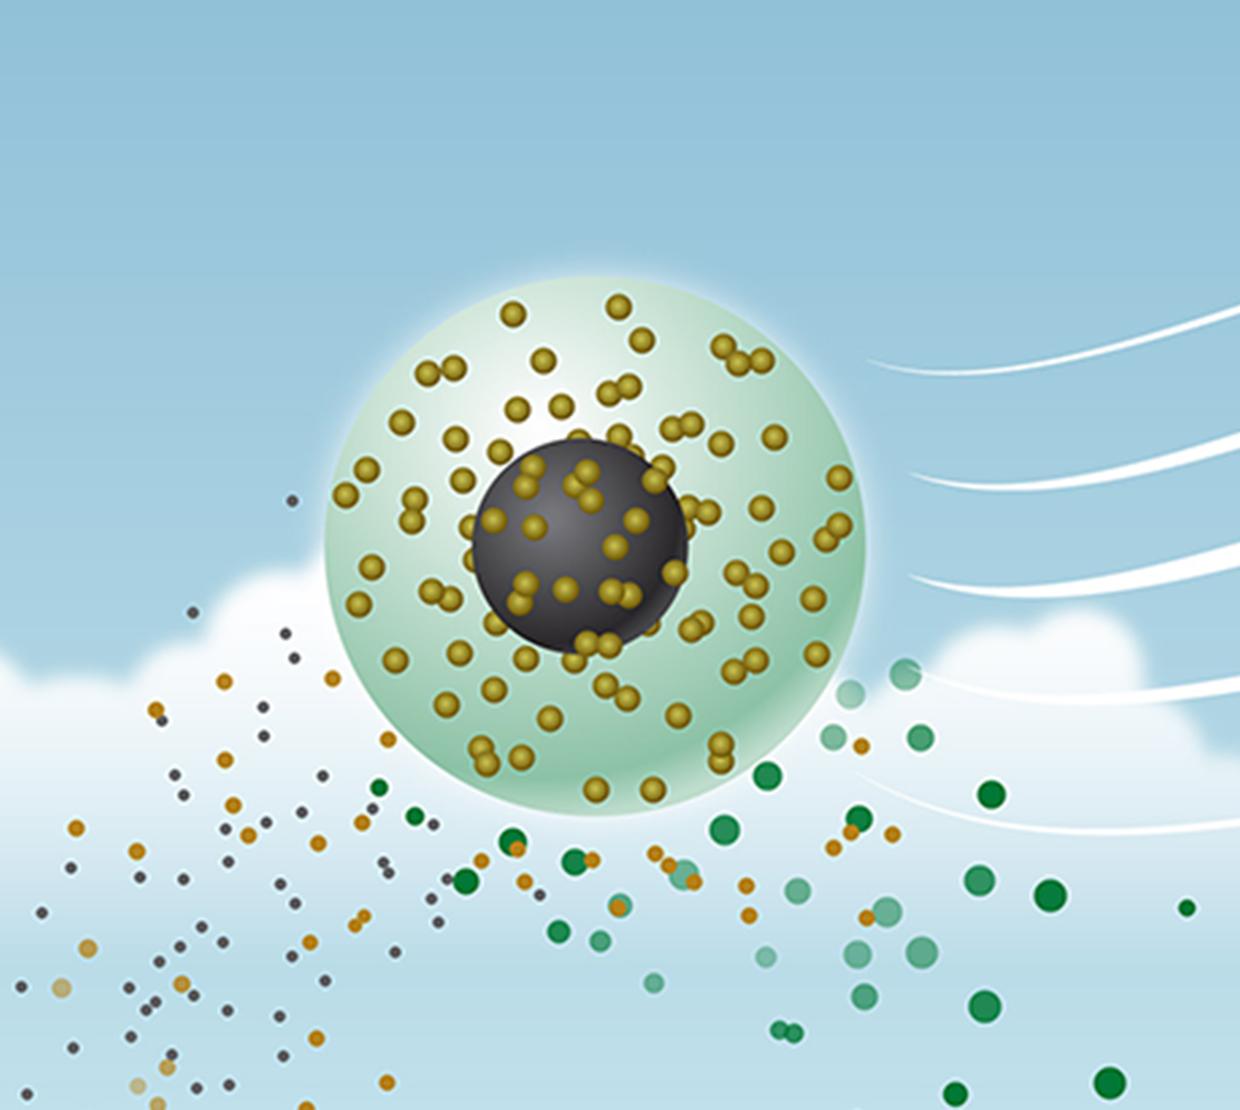 Illustration of toxic particles in the wind